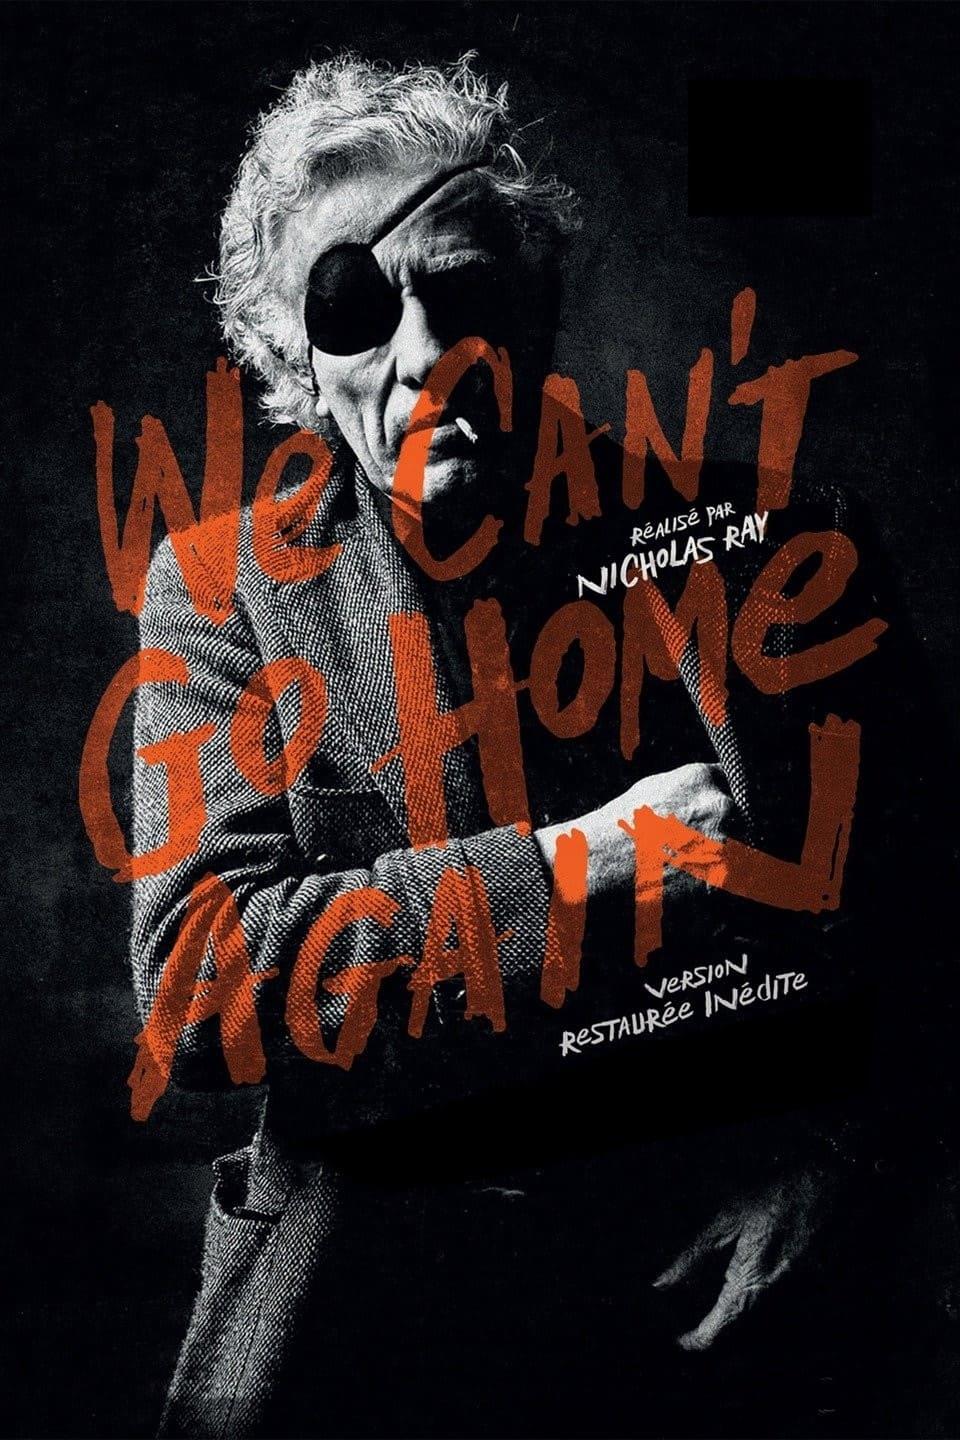 We Can't Go Home Again poster